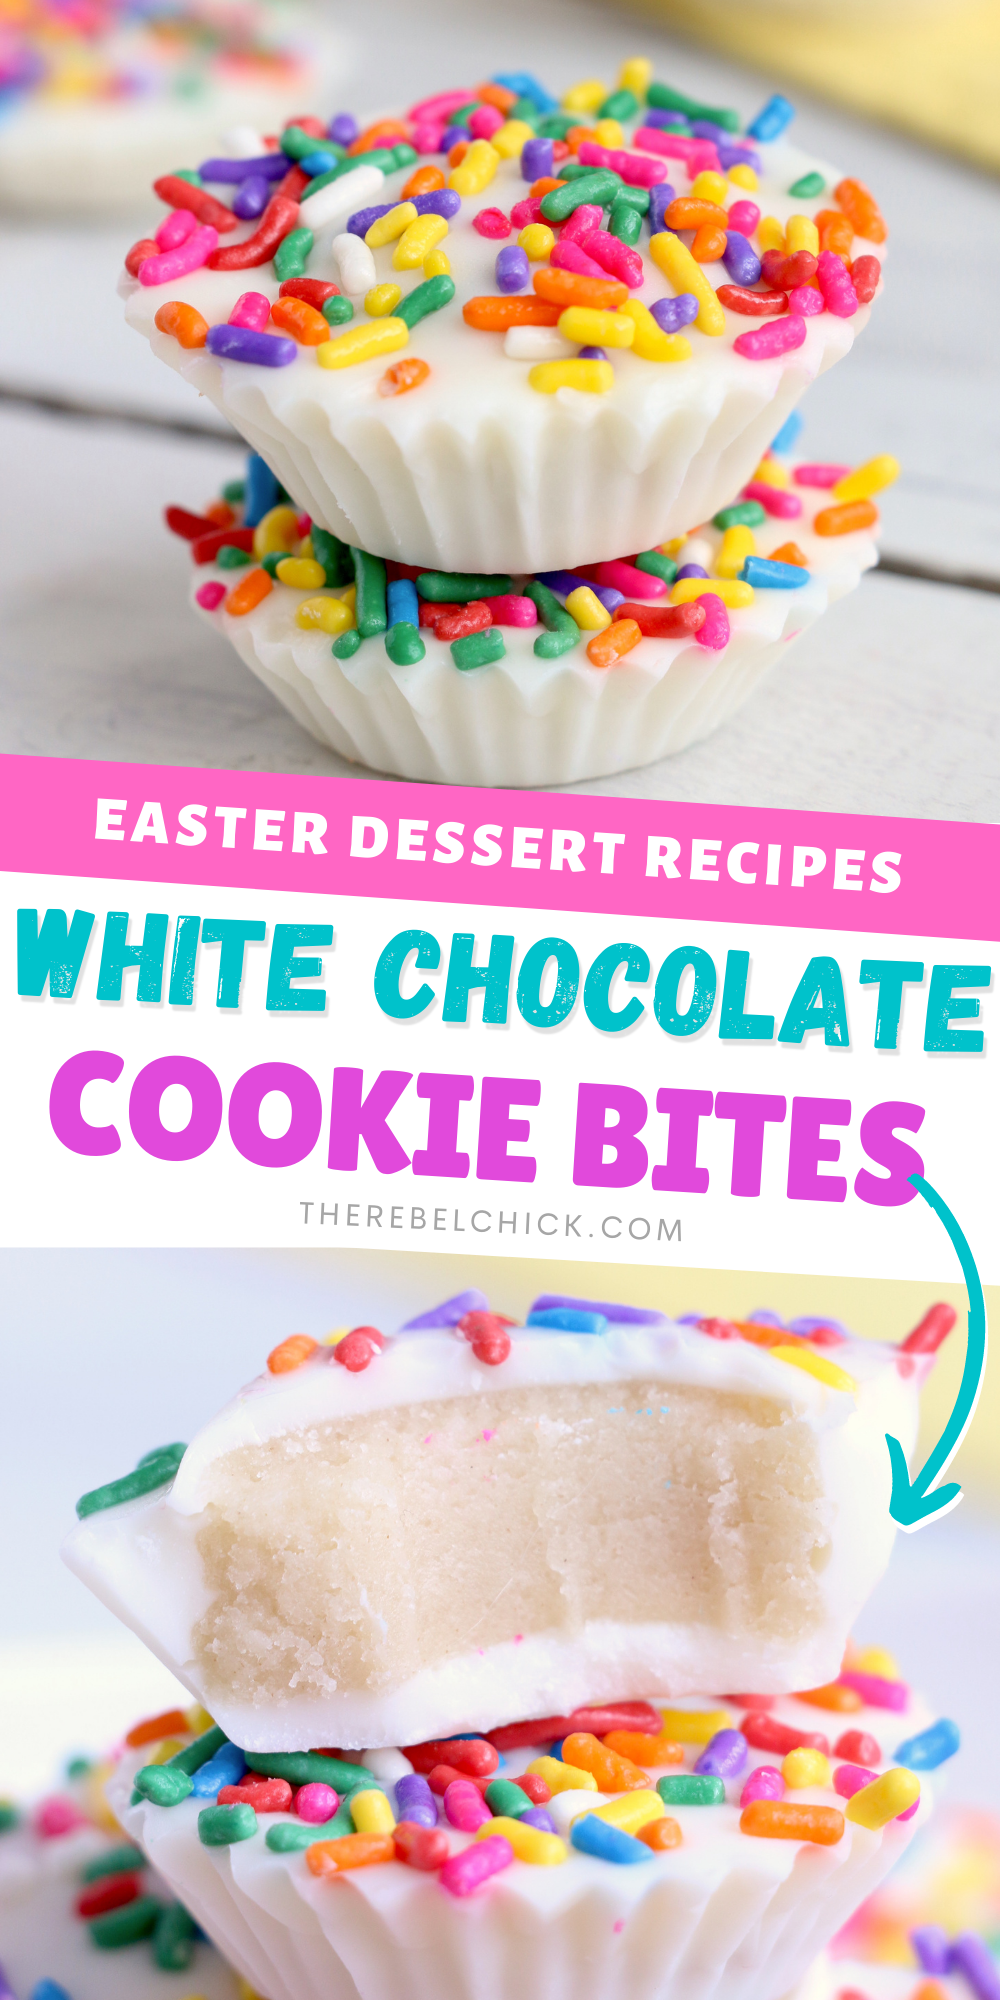 White Chocolate Sugar Cookie Bites Recipe for Easter